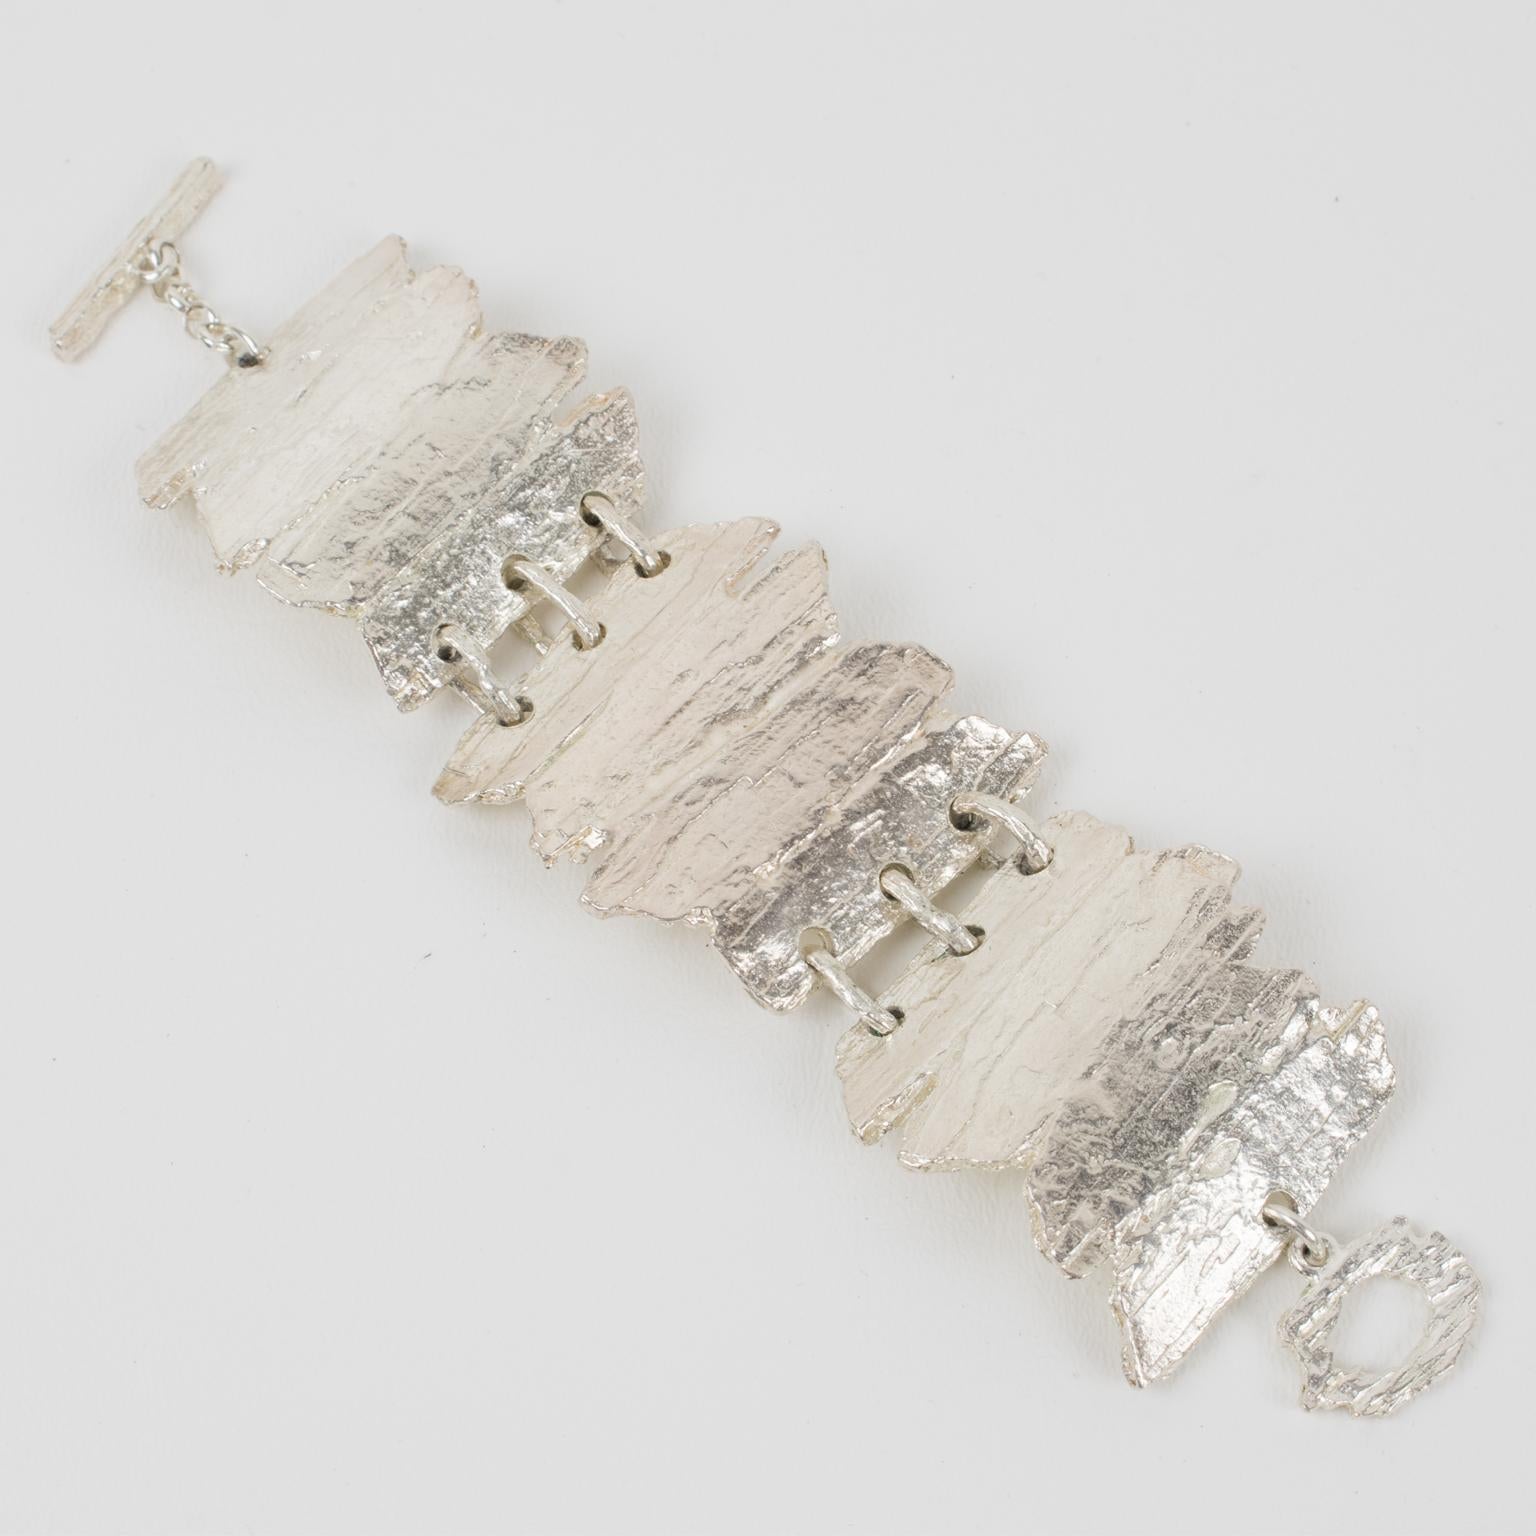 This stunning modernist silver plate link bracelet by Nelly Biche de Bere, Paris, boasts a chunky oversized bangle with a brutalist carved and hand-made feel design. The design features driftwood with a textured pattern. The three elements are